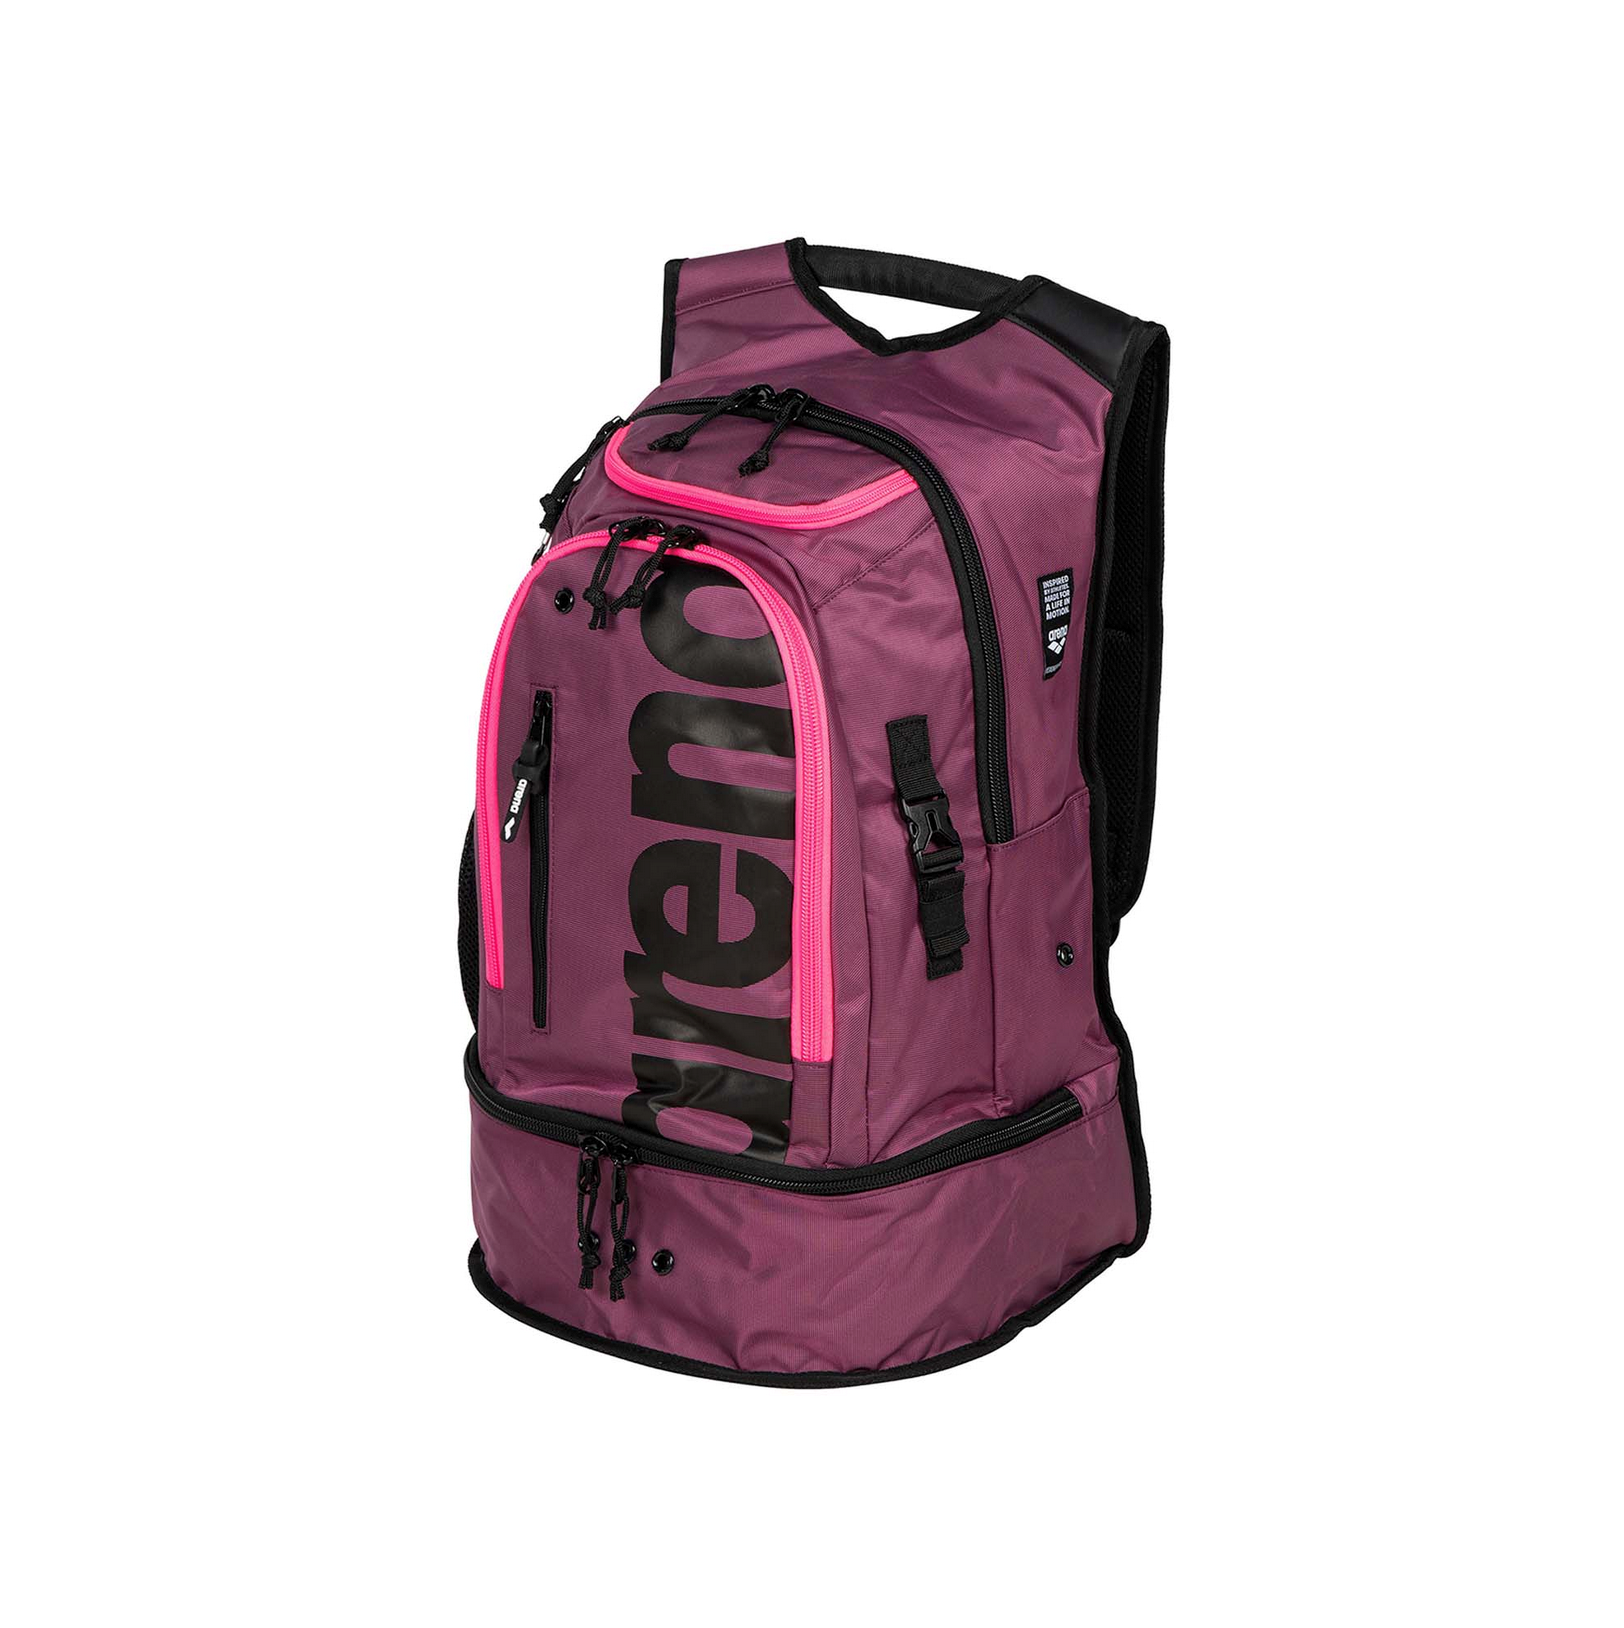 Fastpack 3.0 - Neon/Rosa